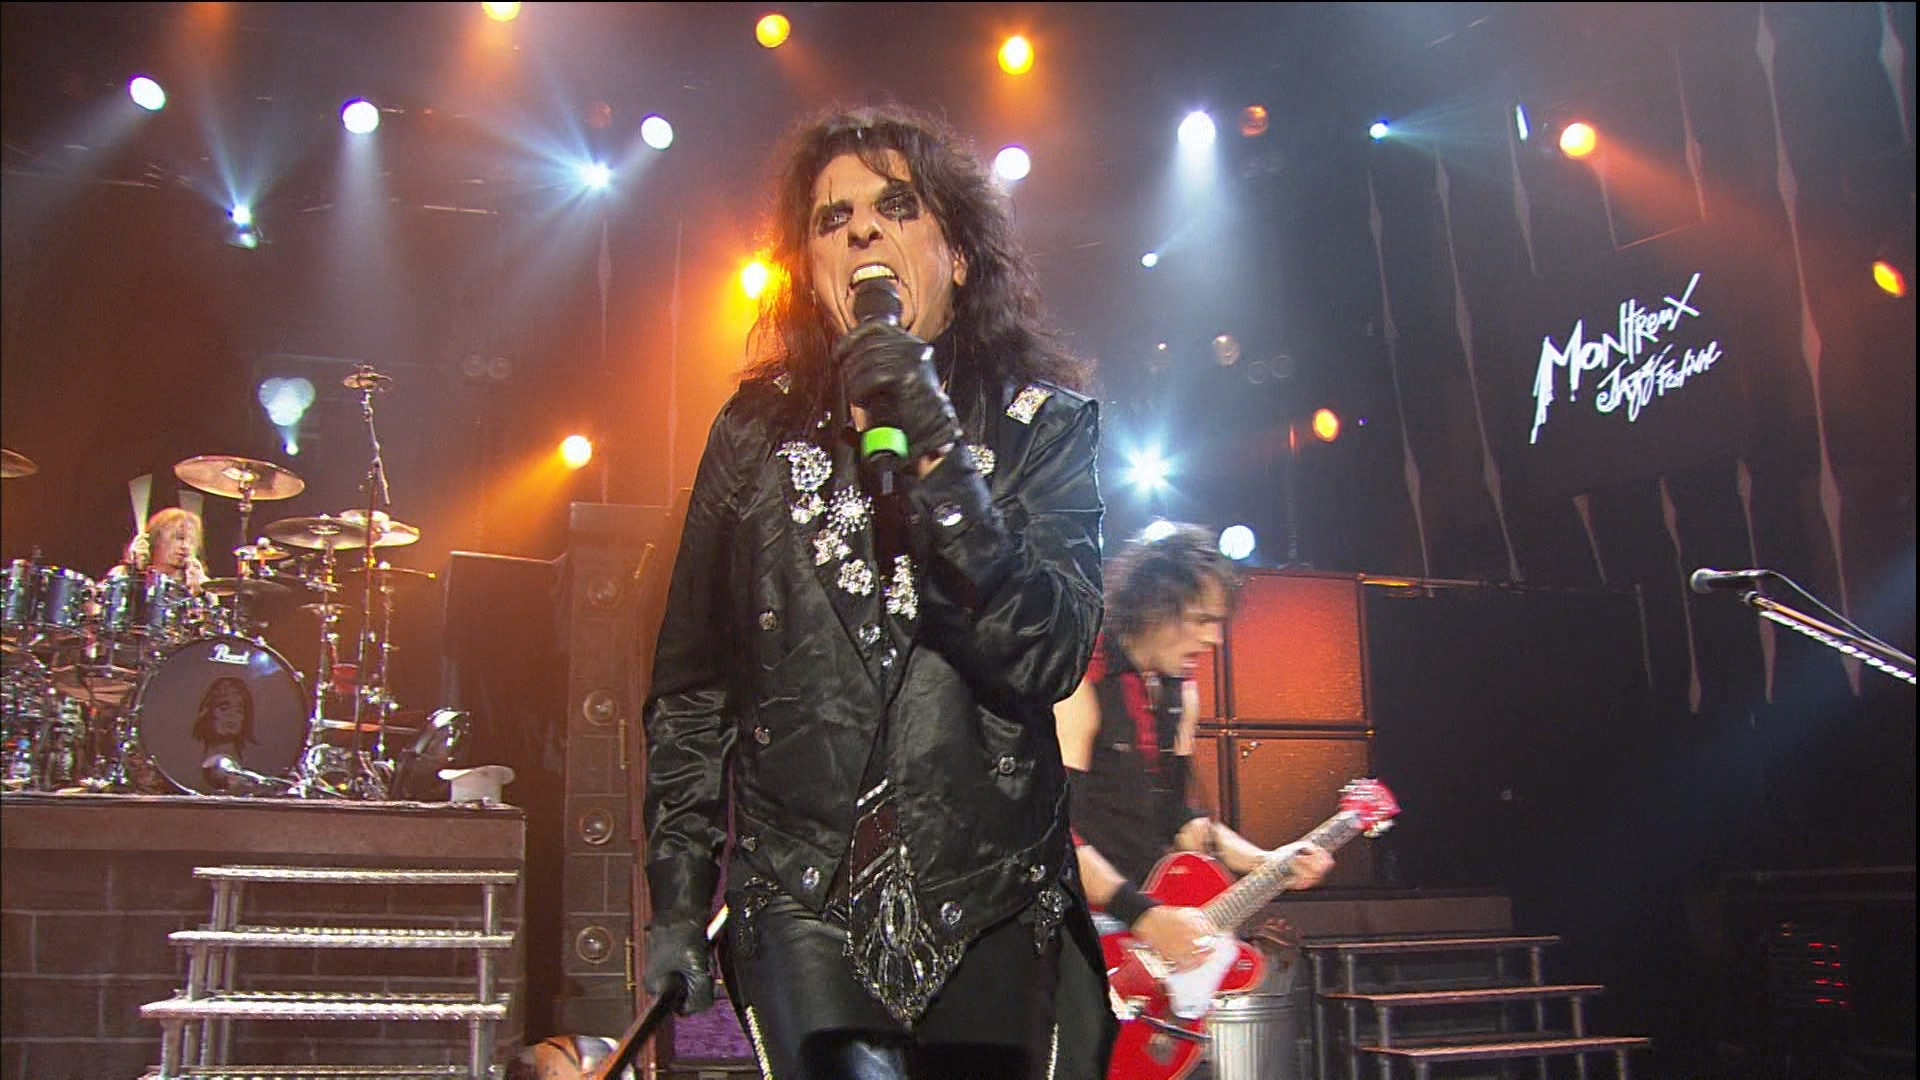 00002.m2ts(Alice_Cooper-Live_At_Montreux_2005)_20190114_214519.756.jpg